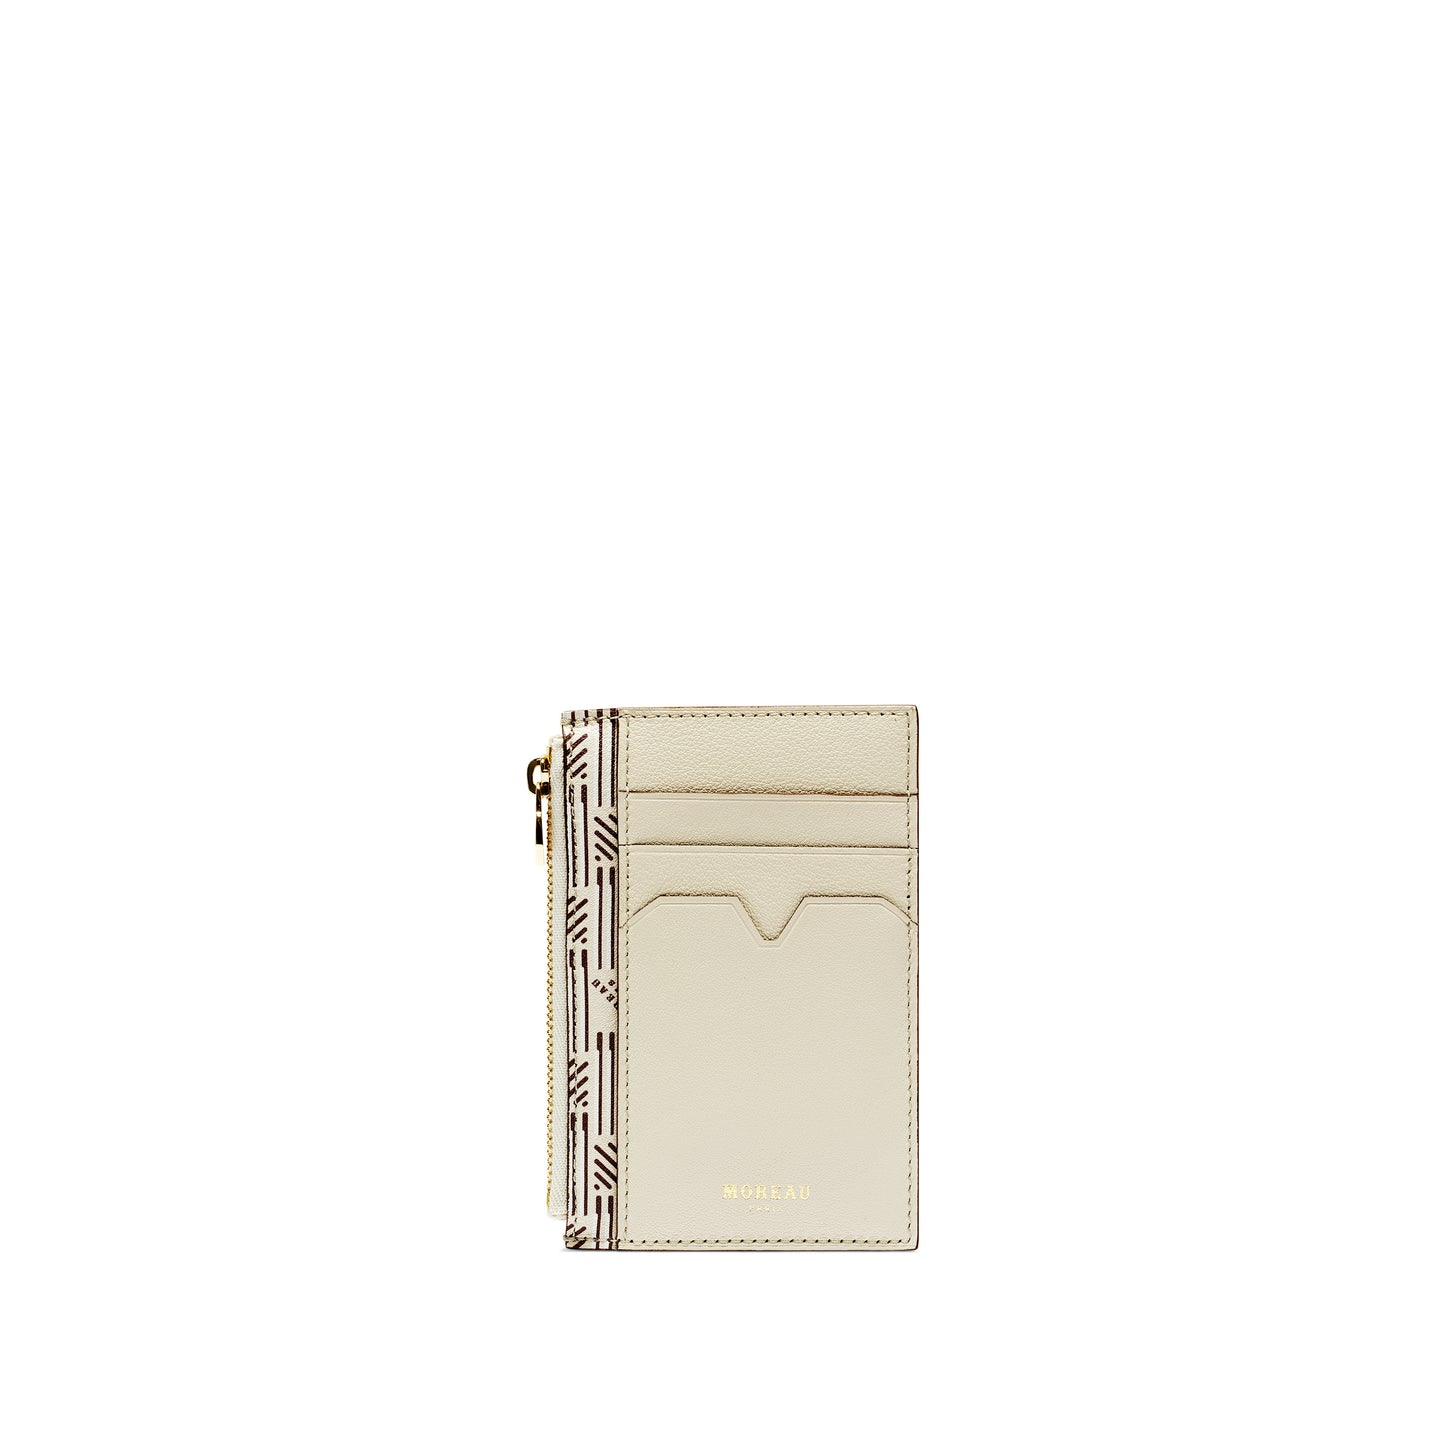 3 Credit Card Holder with Zip in Champagne